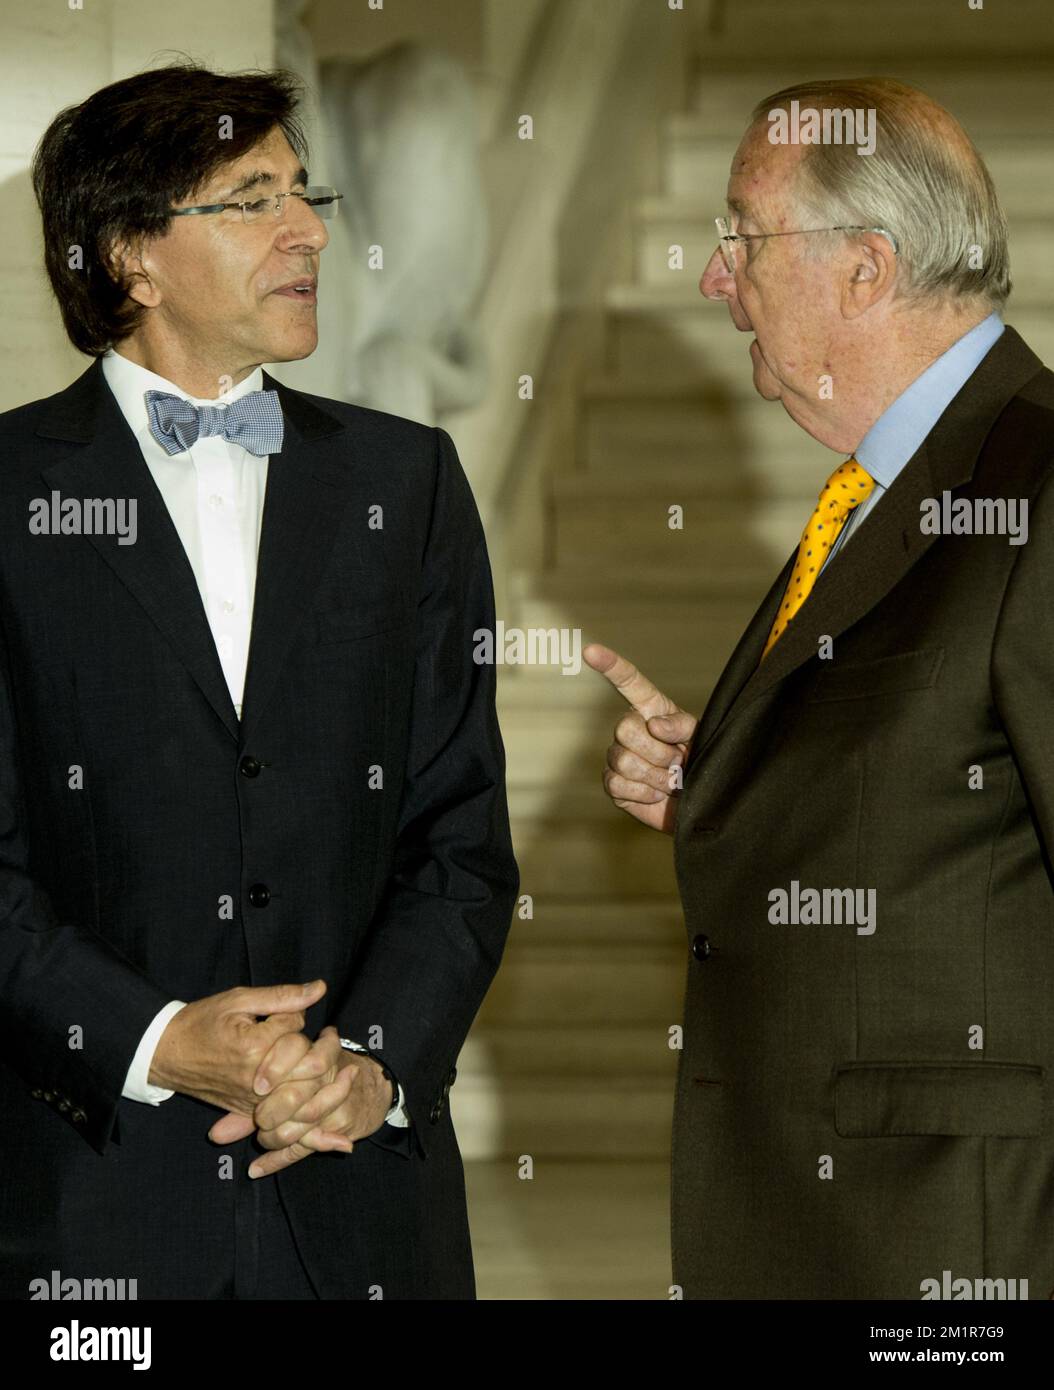 King Albert II of Belgium (R) talks to Belgian Prime Minister Elio Di Rupo during a reception at the royal castle in Laeken - Laken, Brussels for the Minister-Presidents of the regions and communities during the reign of King Albert II of Belgium, Friday 12 July 2013.  Stock Photo